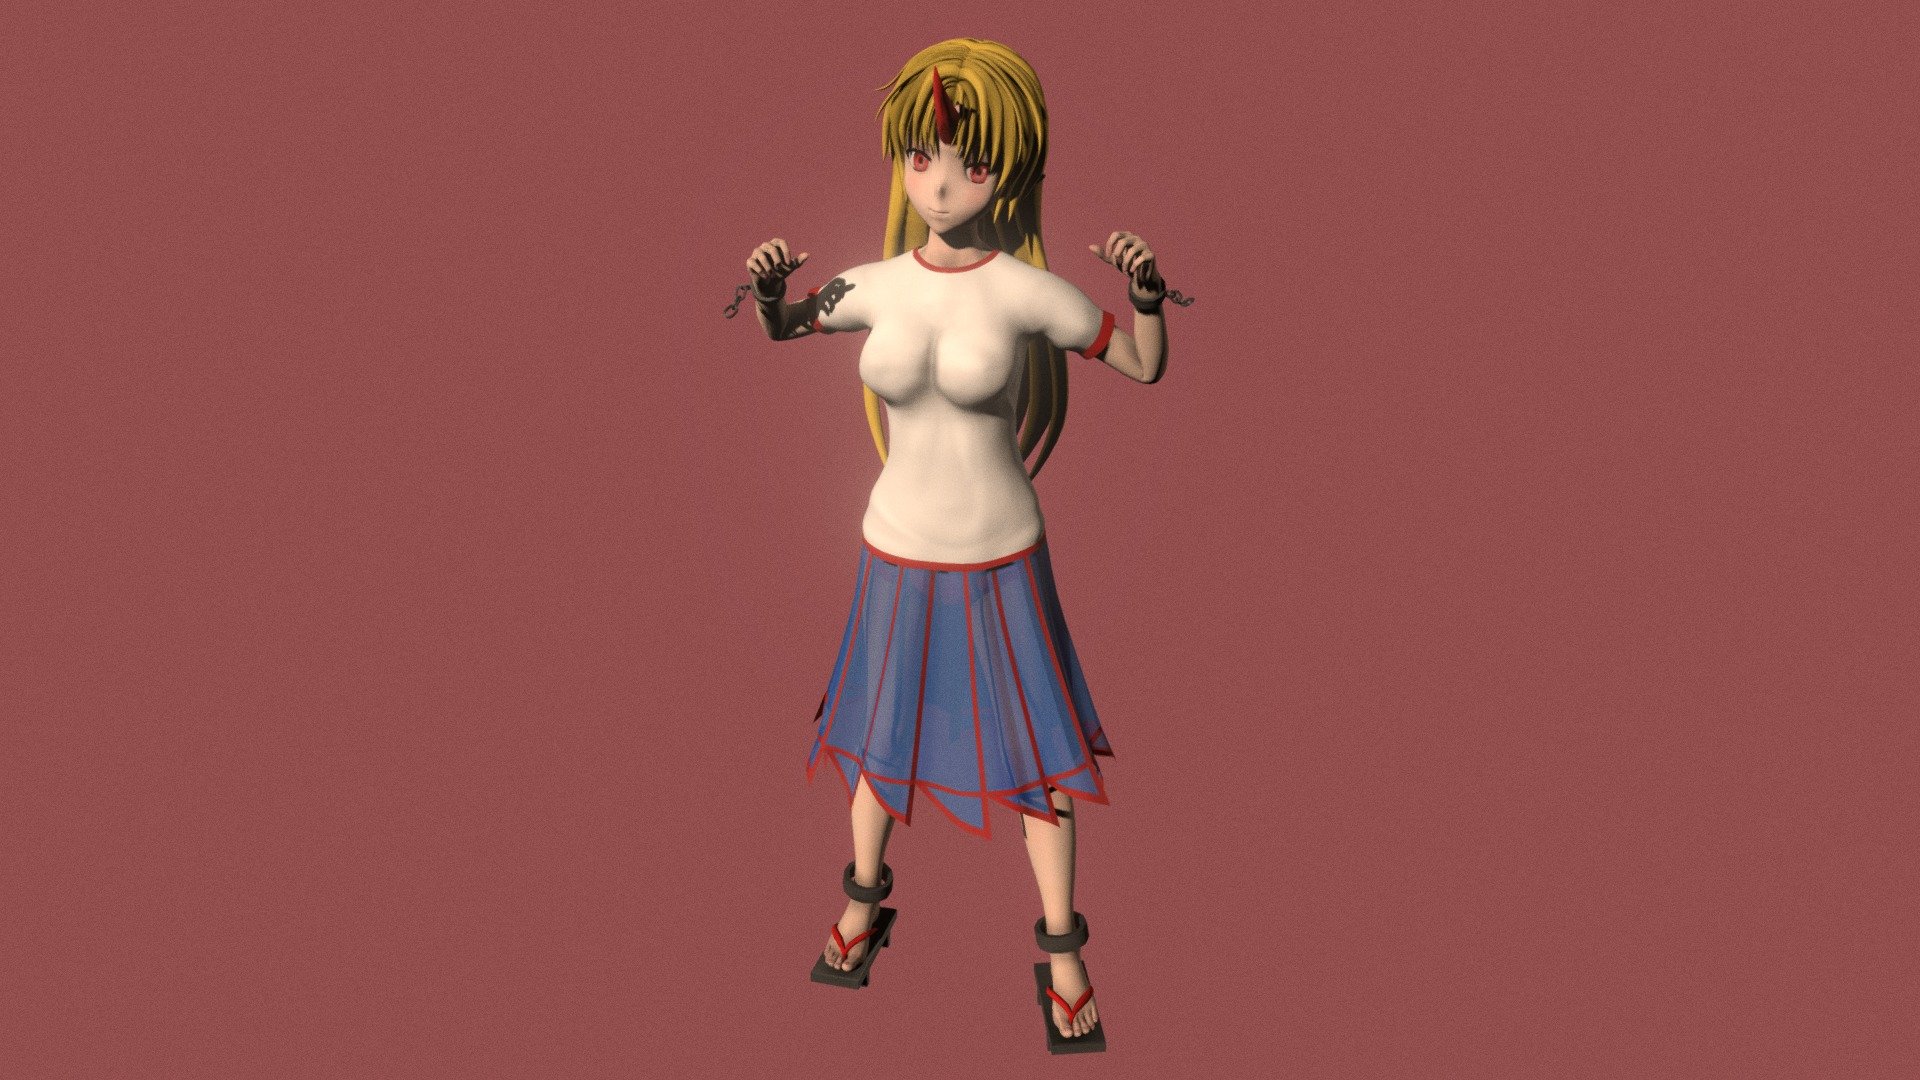 Posed model of anime girl Yuugi Hoshiguma (Touhou).

This product include .FBX (ver. 7200) and .MAX (ver. 2010) files.

Rigged version: https://sketchfab.com/3d-models/t-pose-rigged-model-of-yuugi-hoshiguma-875f4e5fea5d41e2bf83797daeb9e460

I support convert this 3D model to various file formats: 3DS; AI; ASE; DAE; DWF; DWG; DXF; FLT; HTR; IGS; M3G; MQO; OBJ; SAT; STL; W3D; WRL; X.

You can buy all of my models in one pack to save cost: https://sketchfab.com/3d-models/all-of-my-anime-girls-c5a56156994e4193b9e8fa21a3b8360b

And I can make commission models.

If you have any questions, please leave a comment or contact me via my email 3d.eden.project@gmail.com 3d model